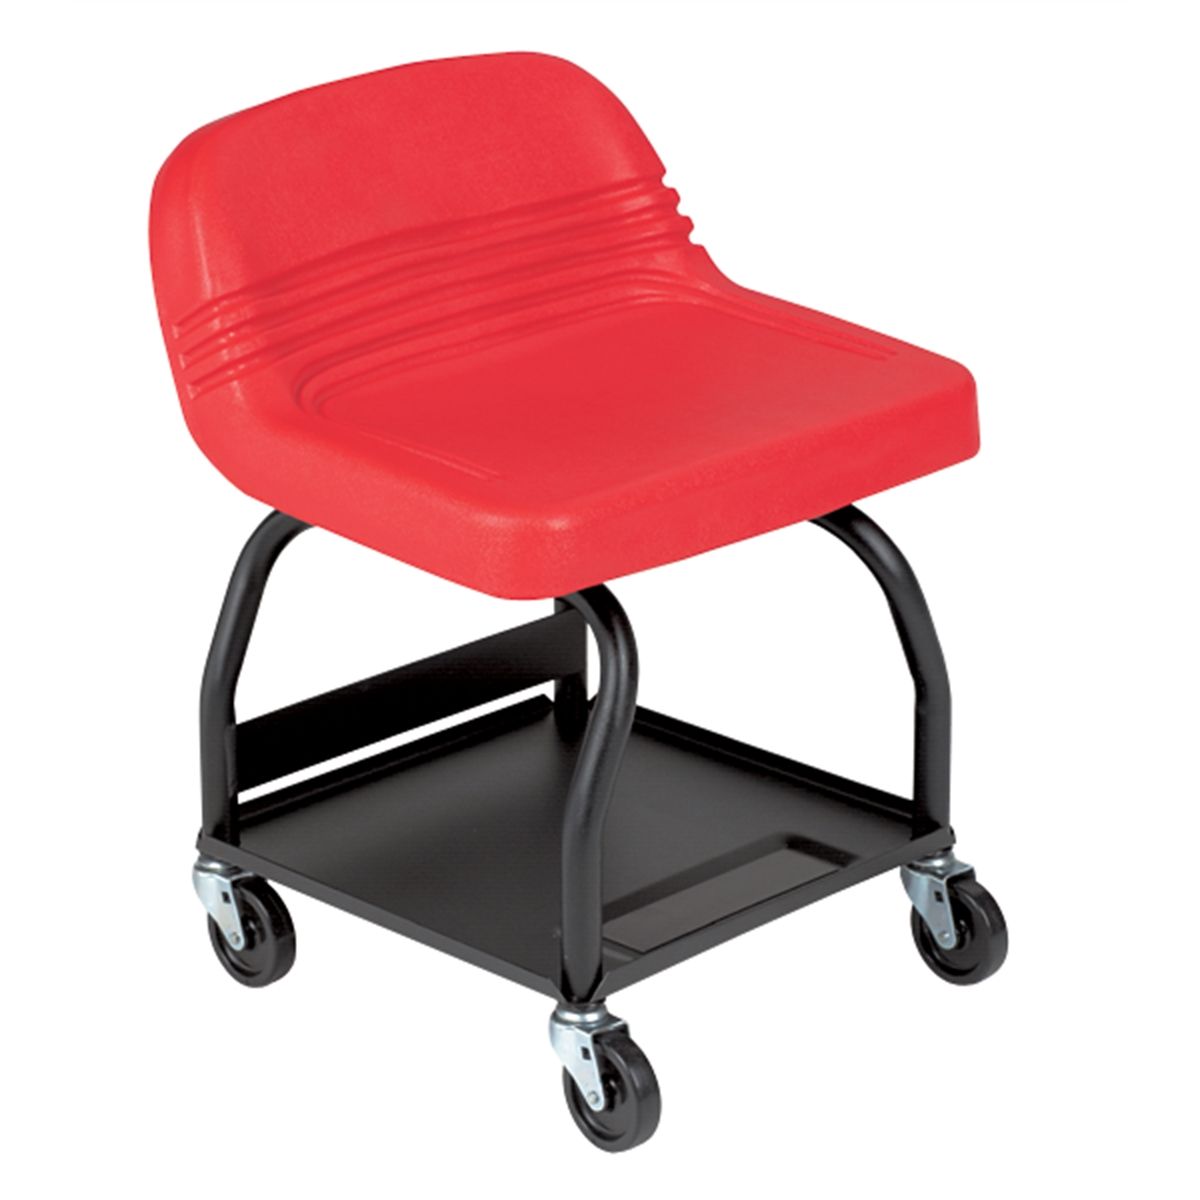 High Back Creeper Seat - Red